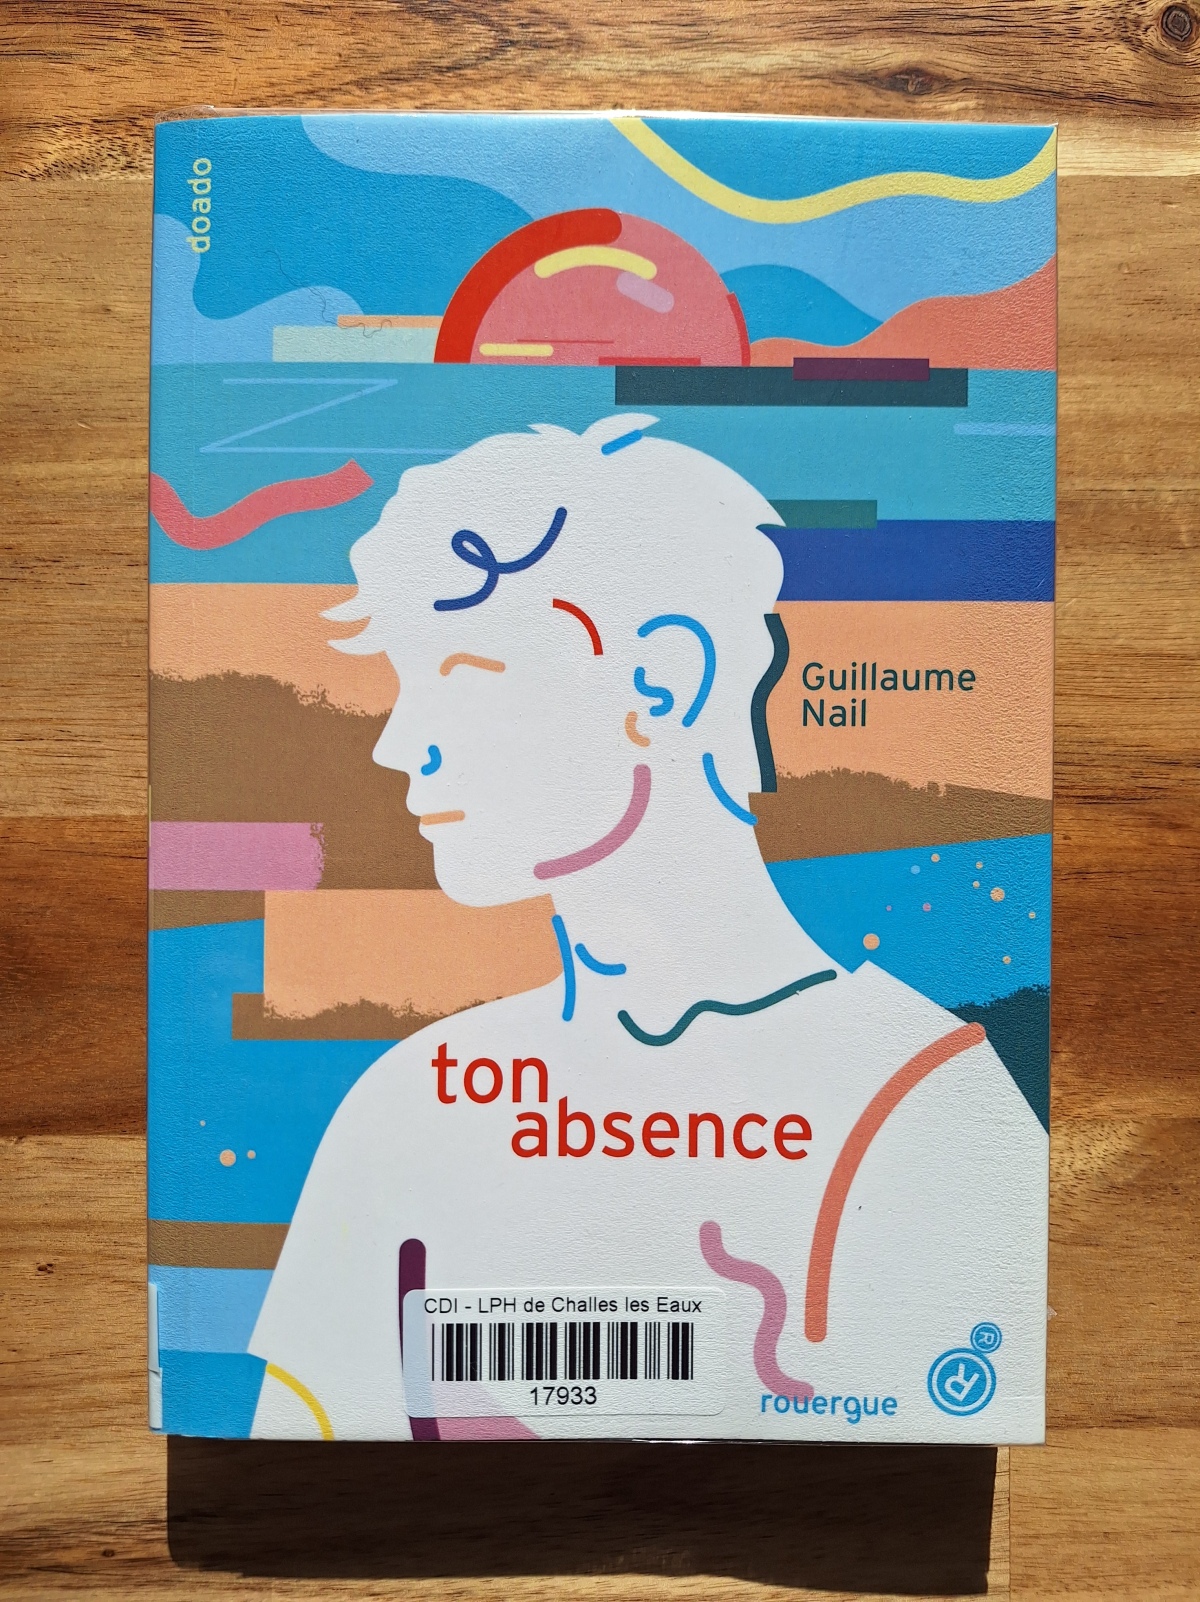 Ton absence / Guillaume Nail